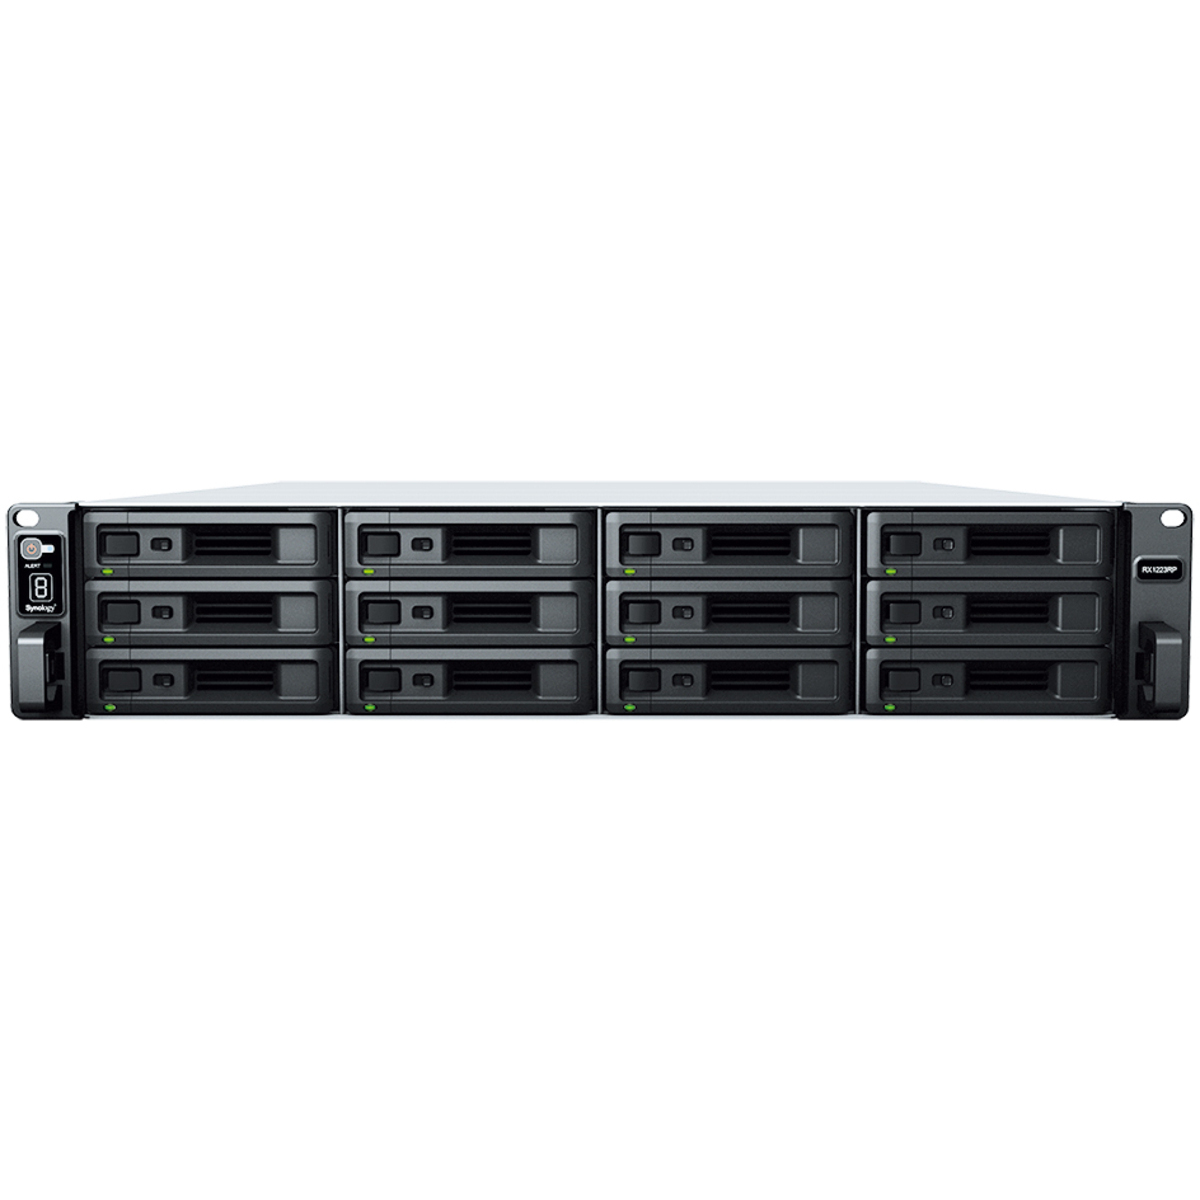 Synology RX1223RP External Expansion Drive 128tb 12-Bay RackMount Large Business / Enterprise Expansion Enclosure 8x16tb Synology HAT5300 Series HAT5300-16T 3.5 7200rpm SATA 6Gb/s HDD ENTERPRISE Class Drives Installed - Burn-In Tested RX1223RP External Expansion Drive